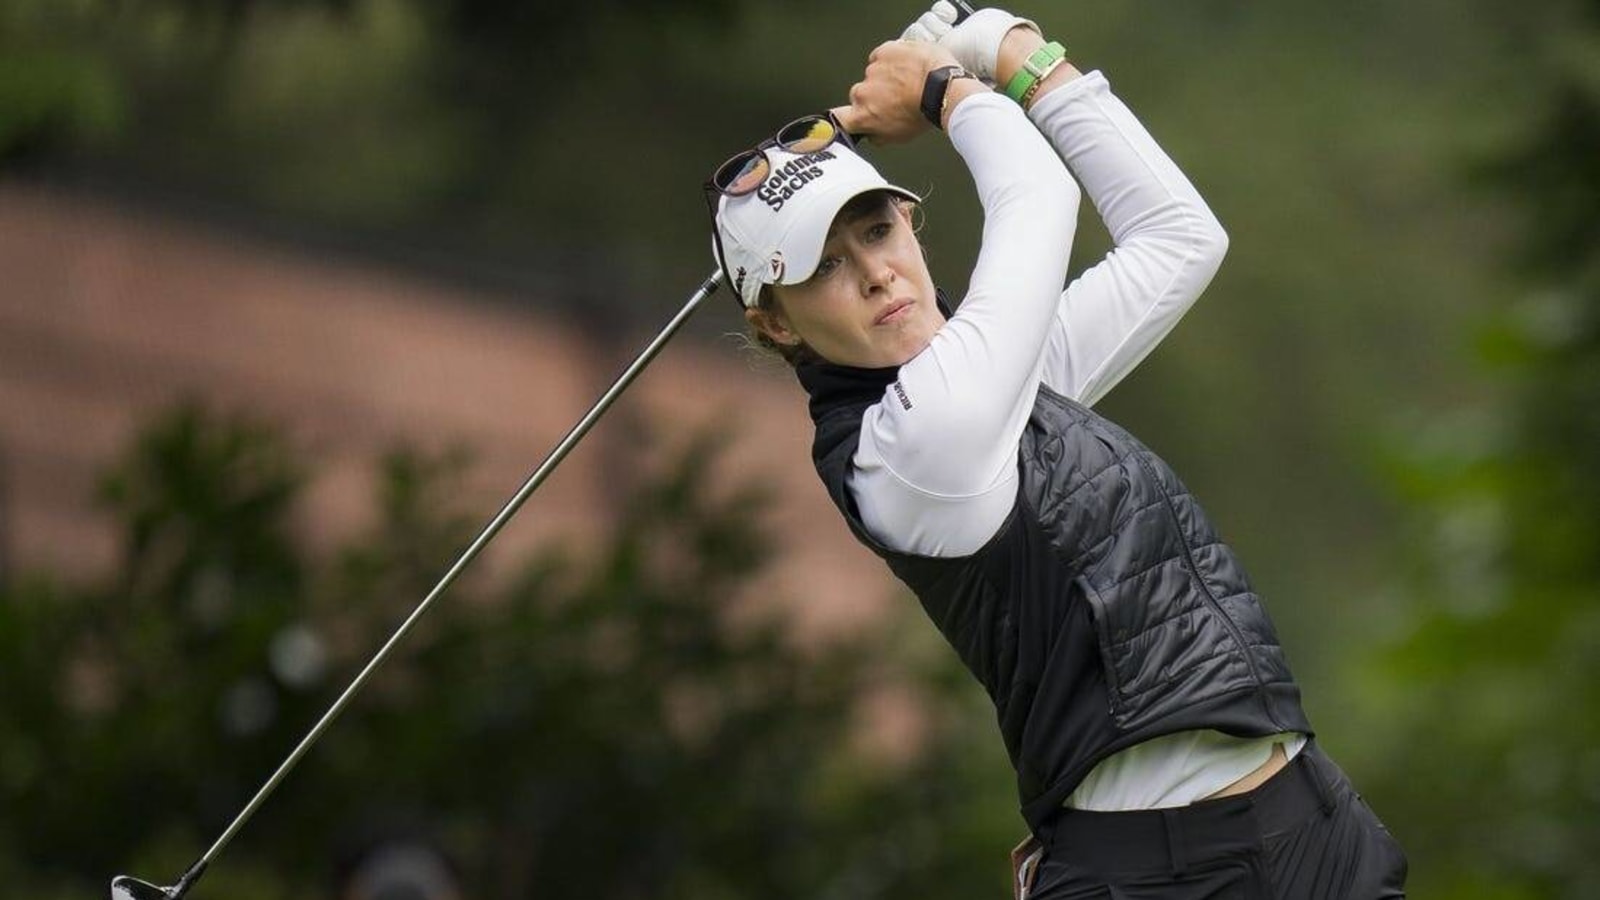 Young U.S. Solheim Cup team bonding in underdog role